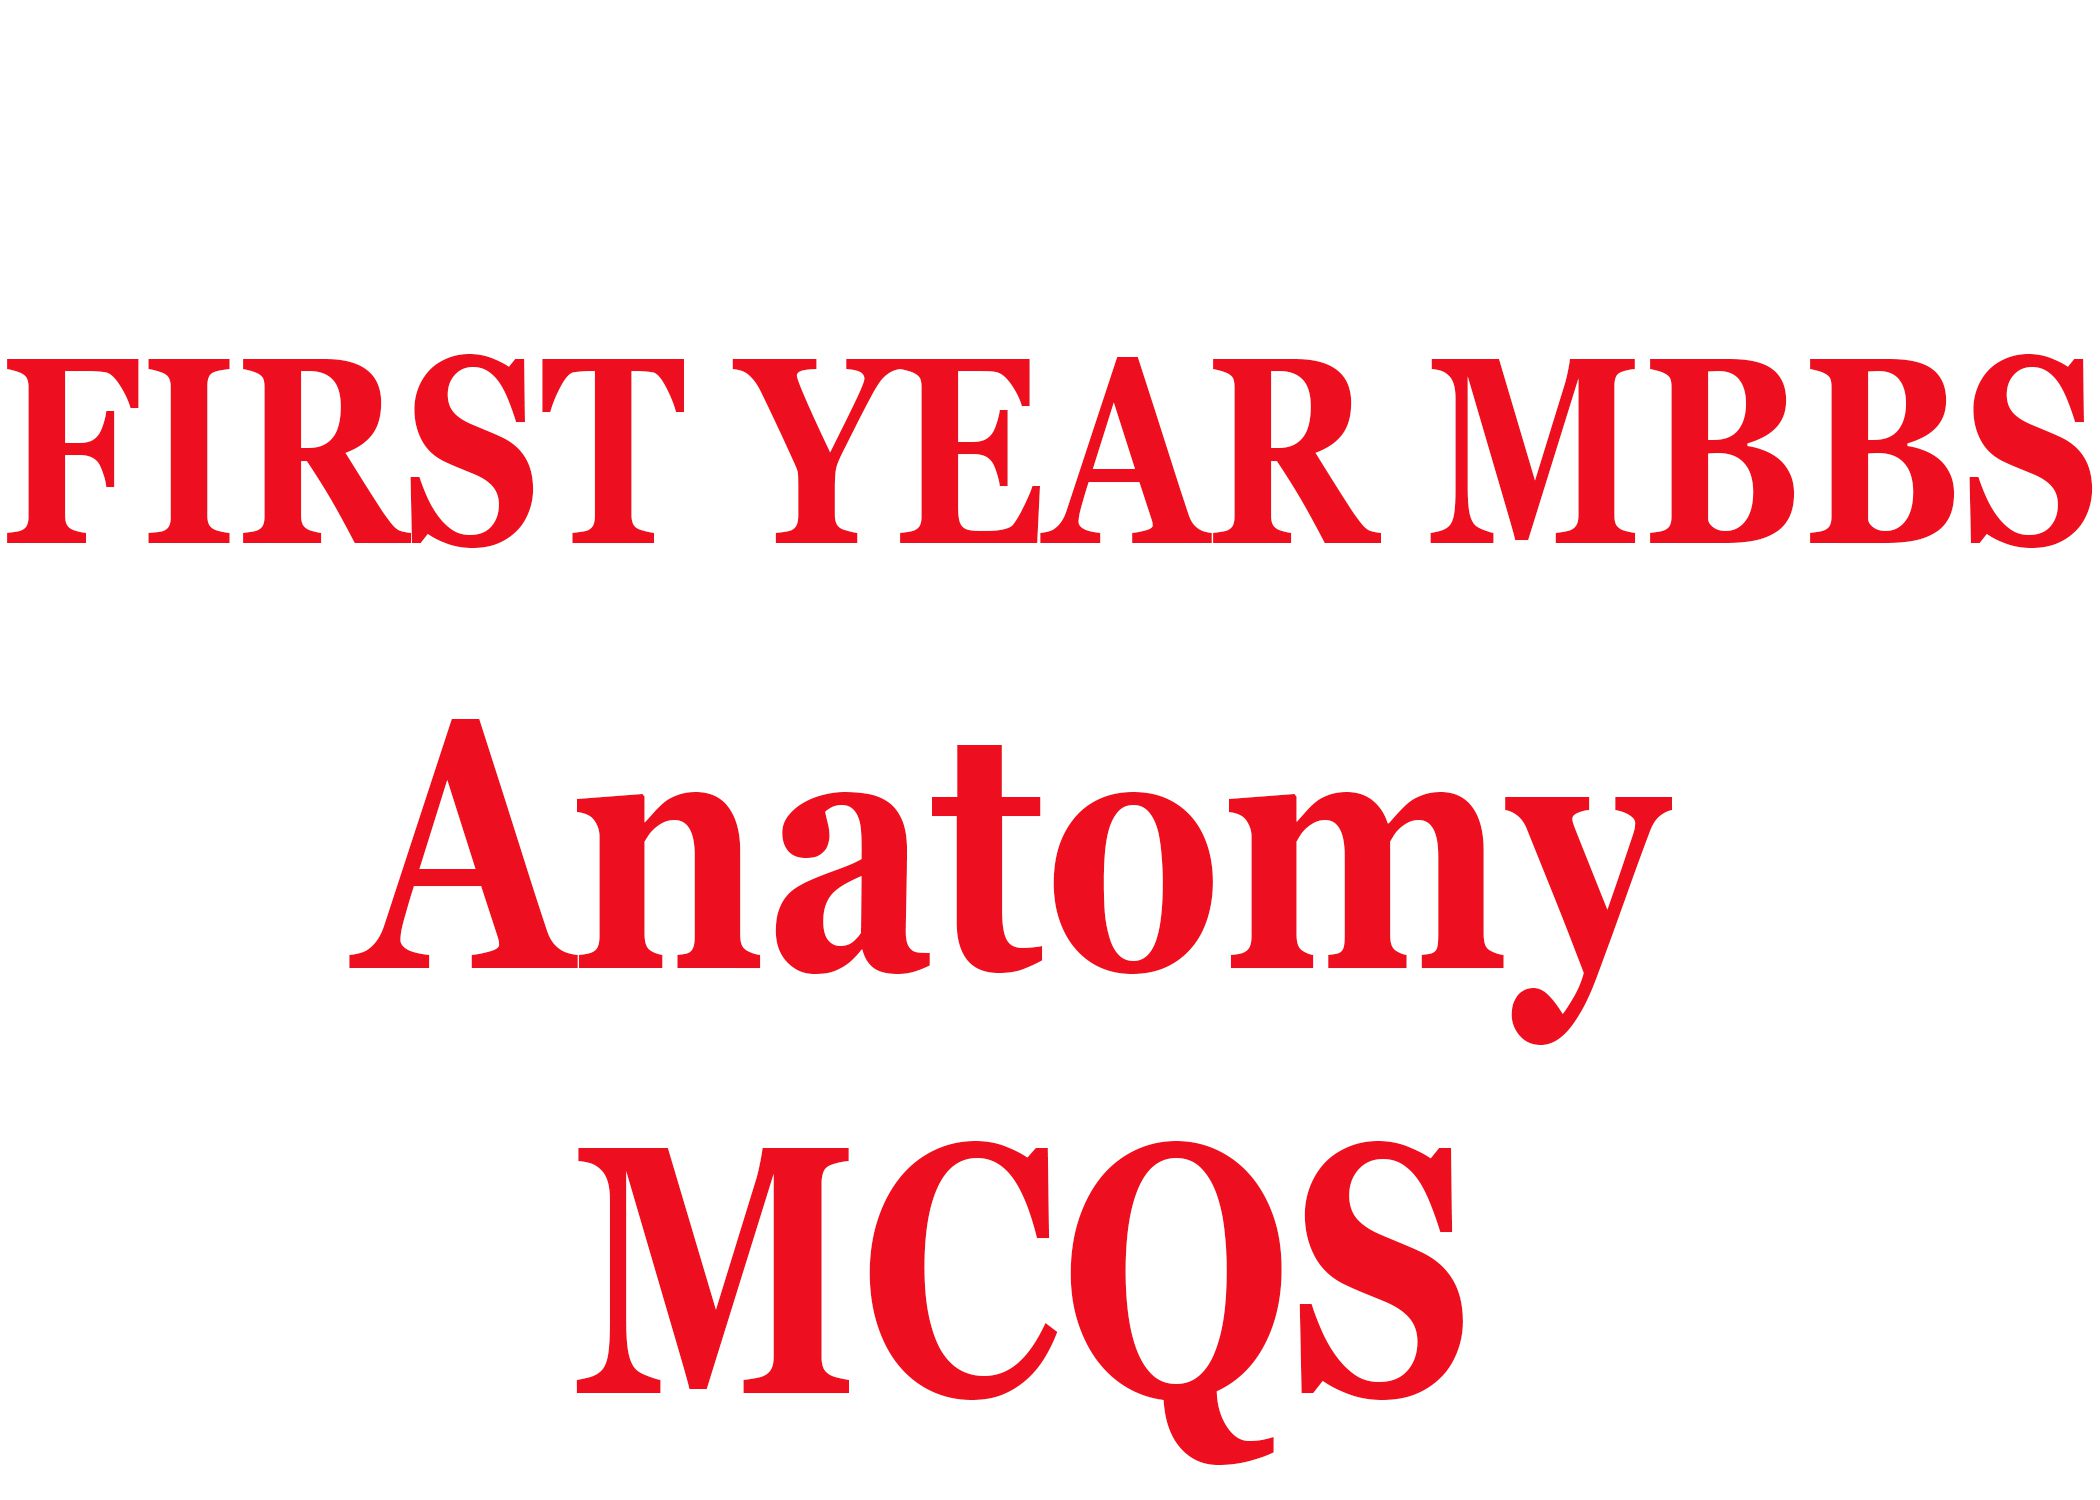 Anatomy mcqs for first year mbbs